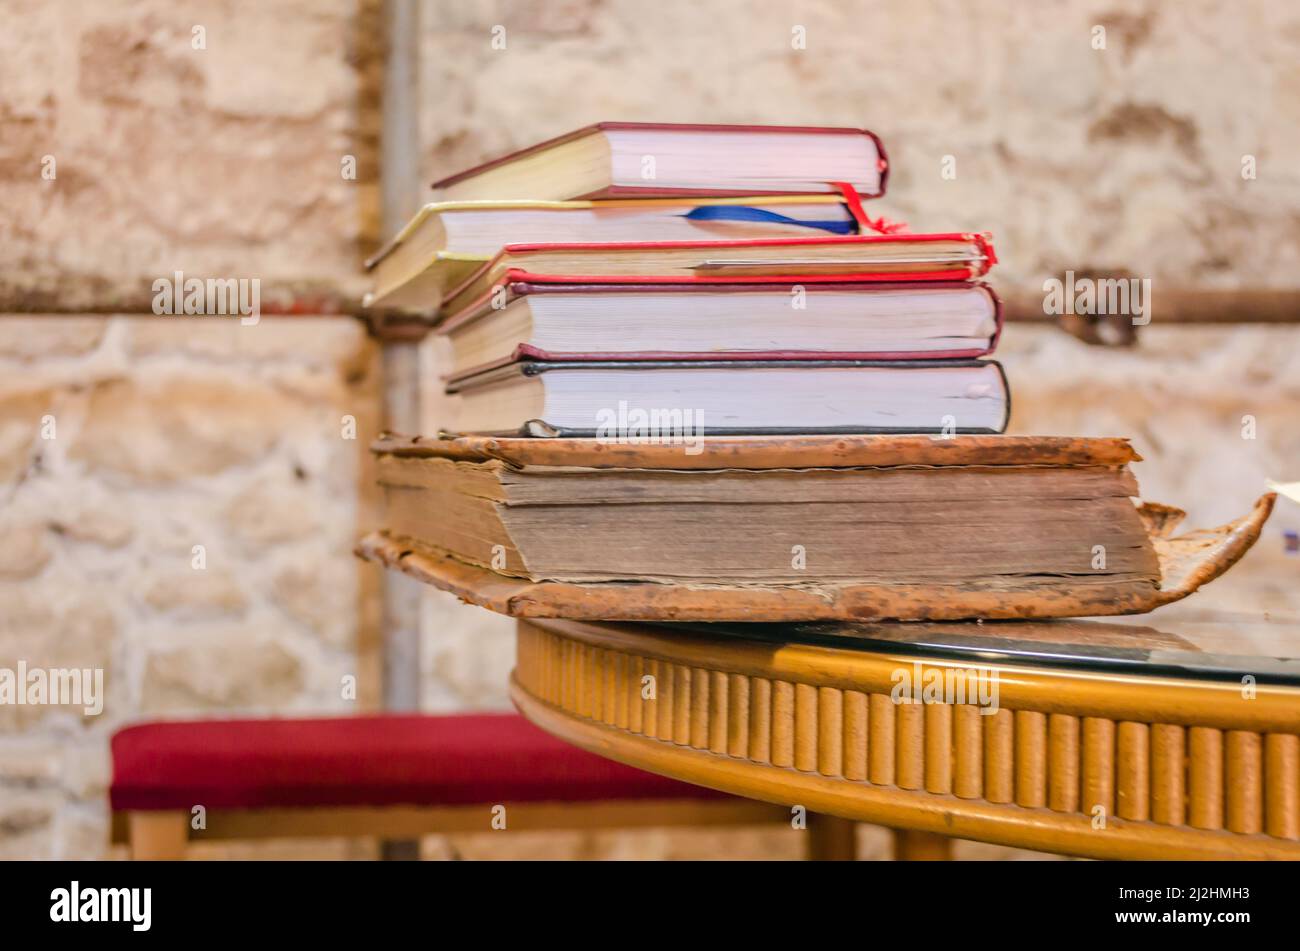 One on top of the other, a pile of stacked old dilapidated books. Stock Photo